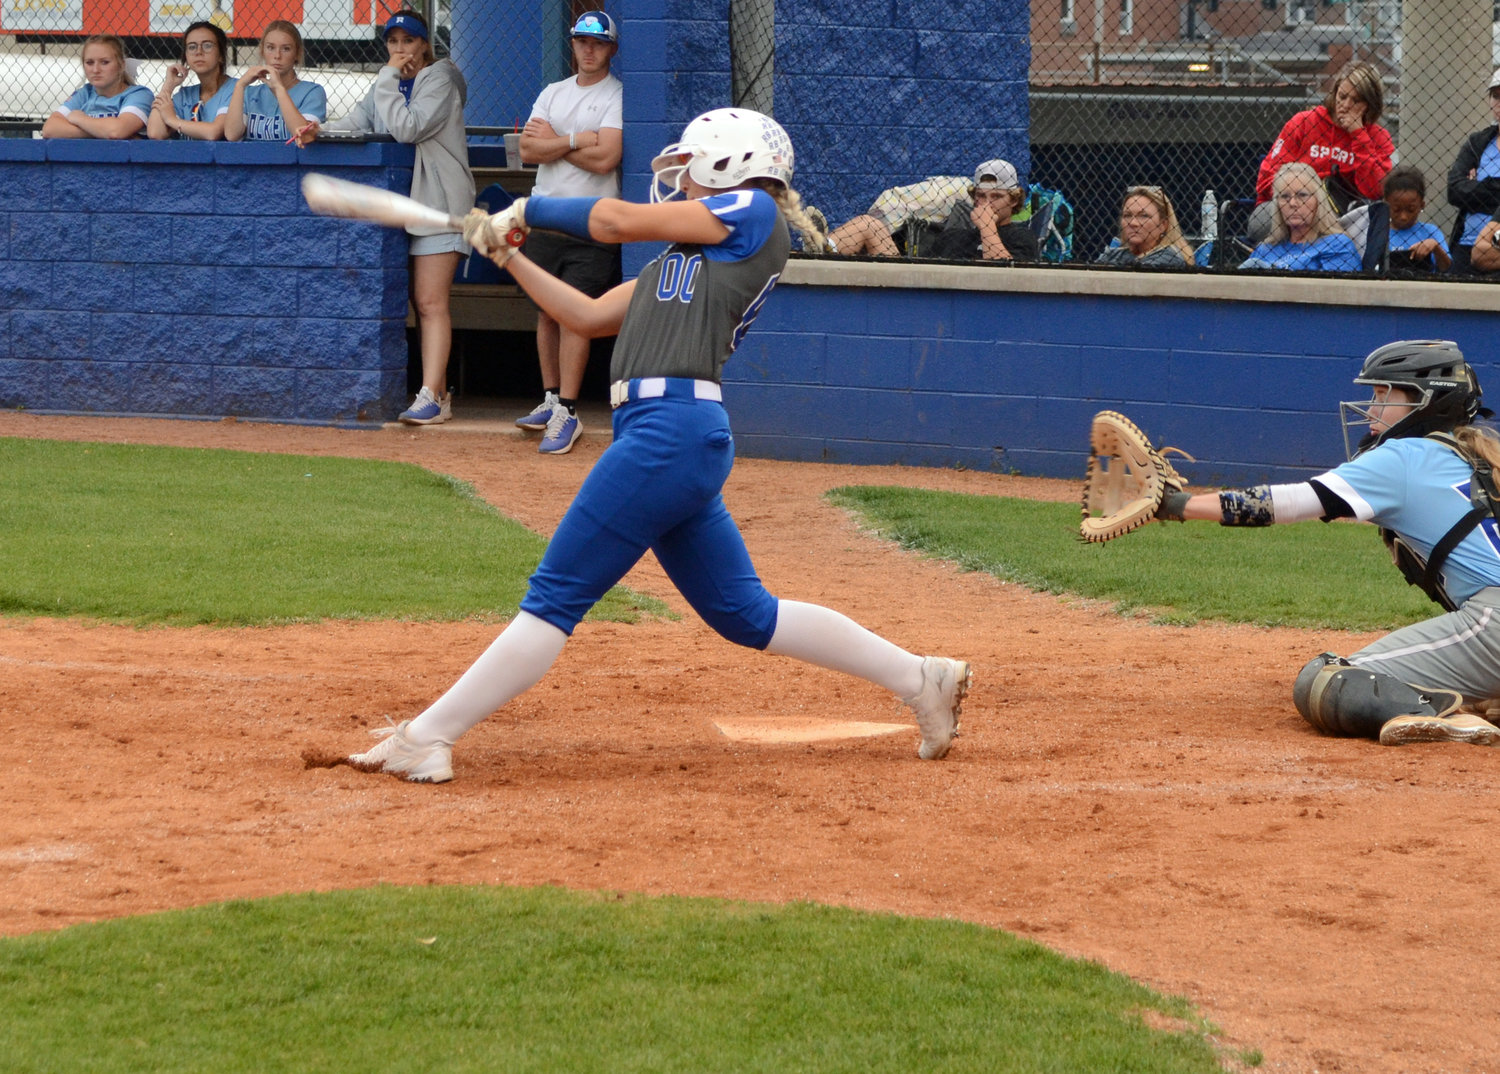 Abby Ferguson rips a bases loaded double to break the game wide open in the bottom of the fourth inning.